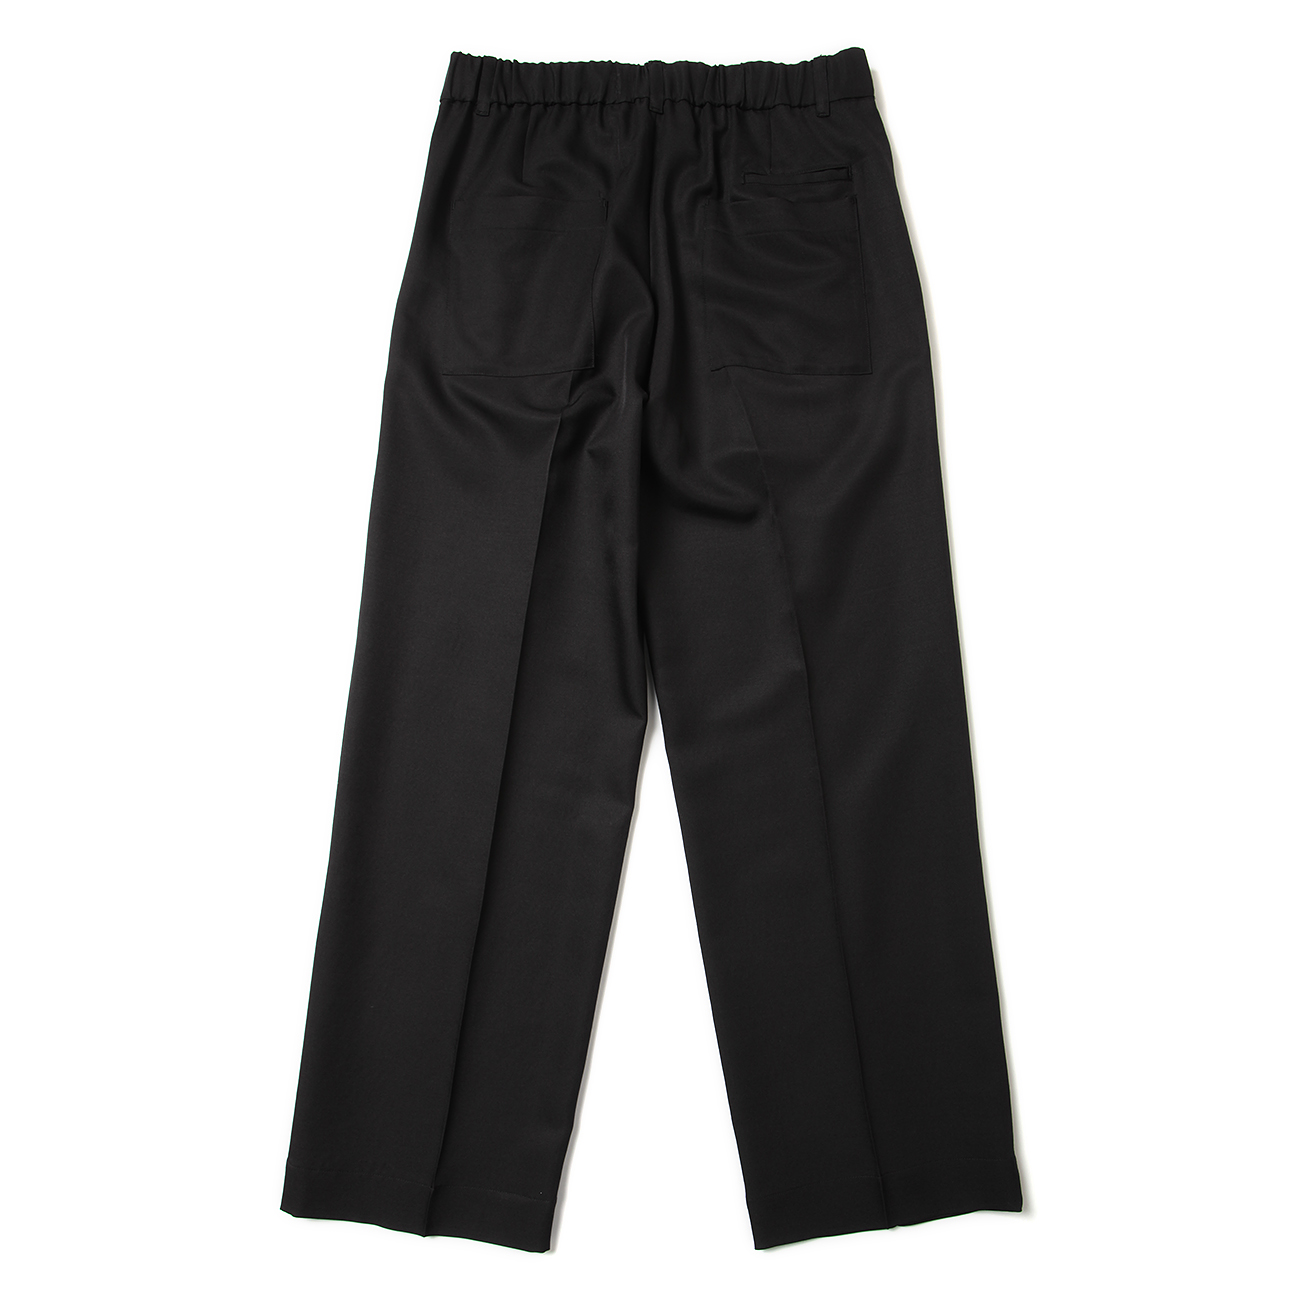 th products / ティーエイチプロダクツ | QUINN / Wide Tailored Pants